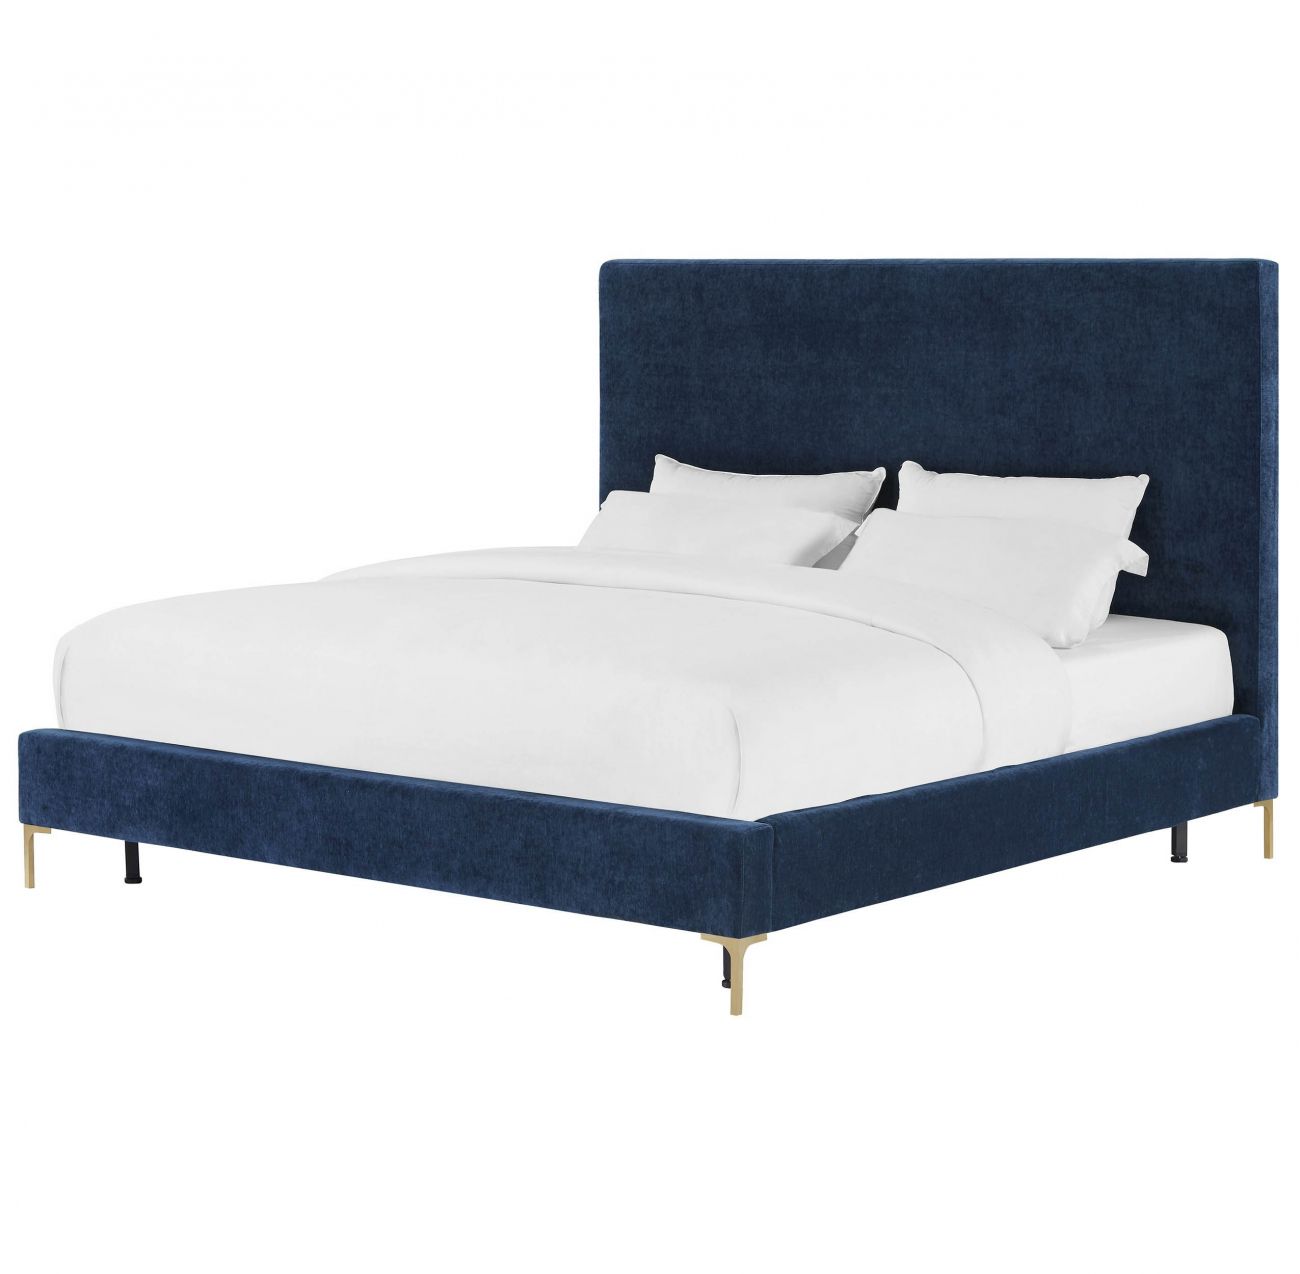 Double bed 160x200 cm blue Mark